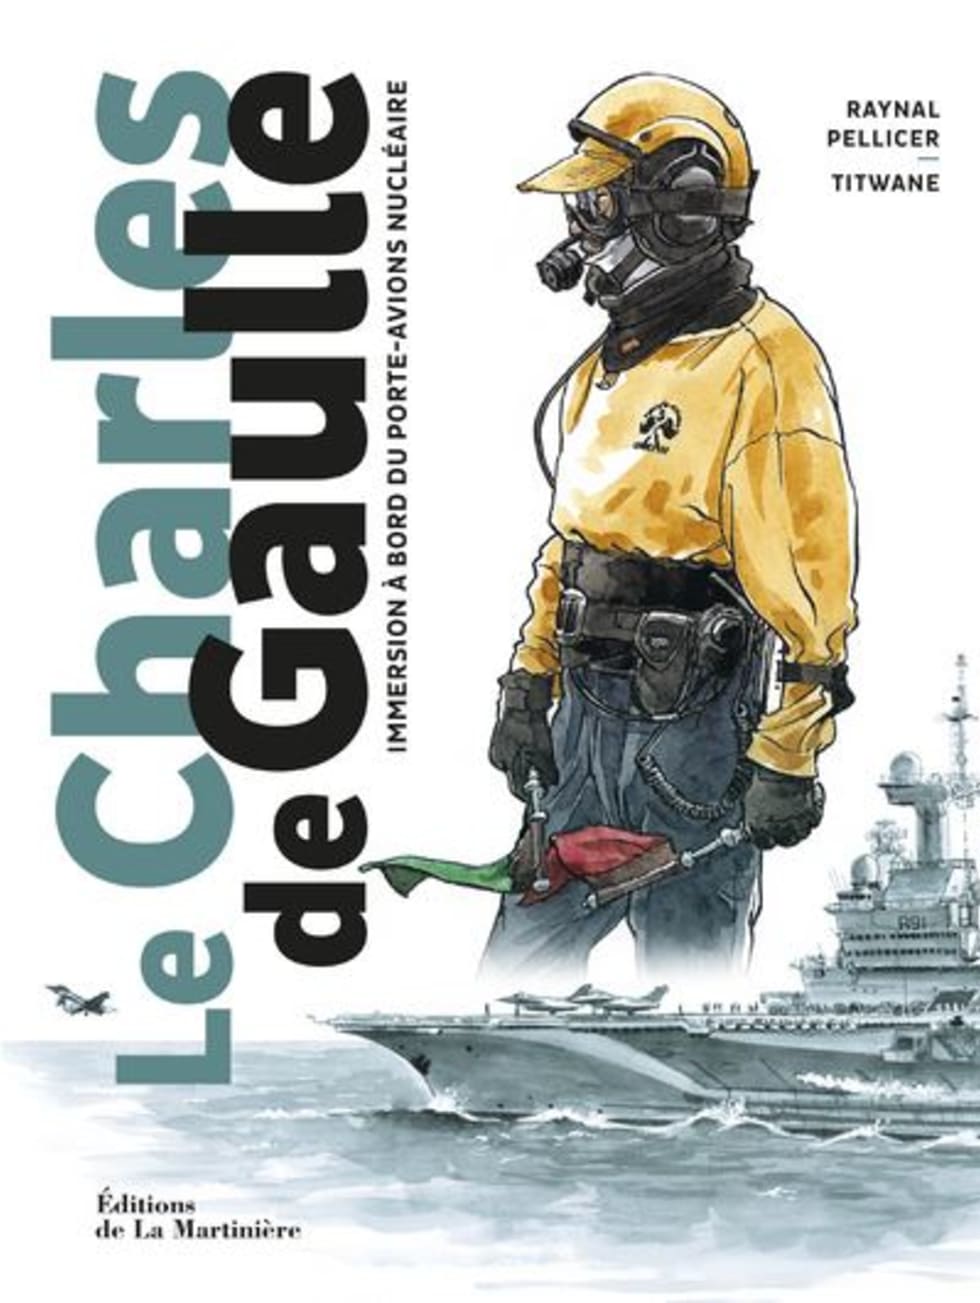 cover Comic book: "The Charles de Gaulle - Immersion on board the nuclear aircraft carrier